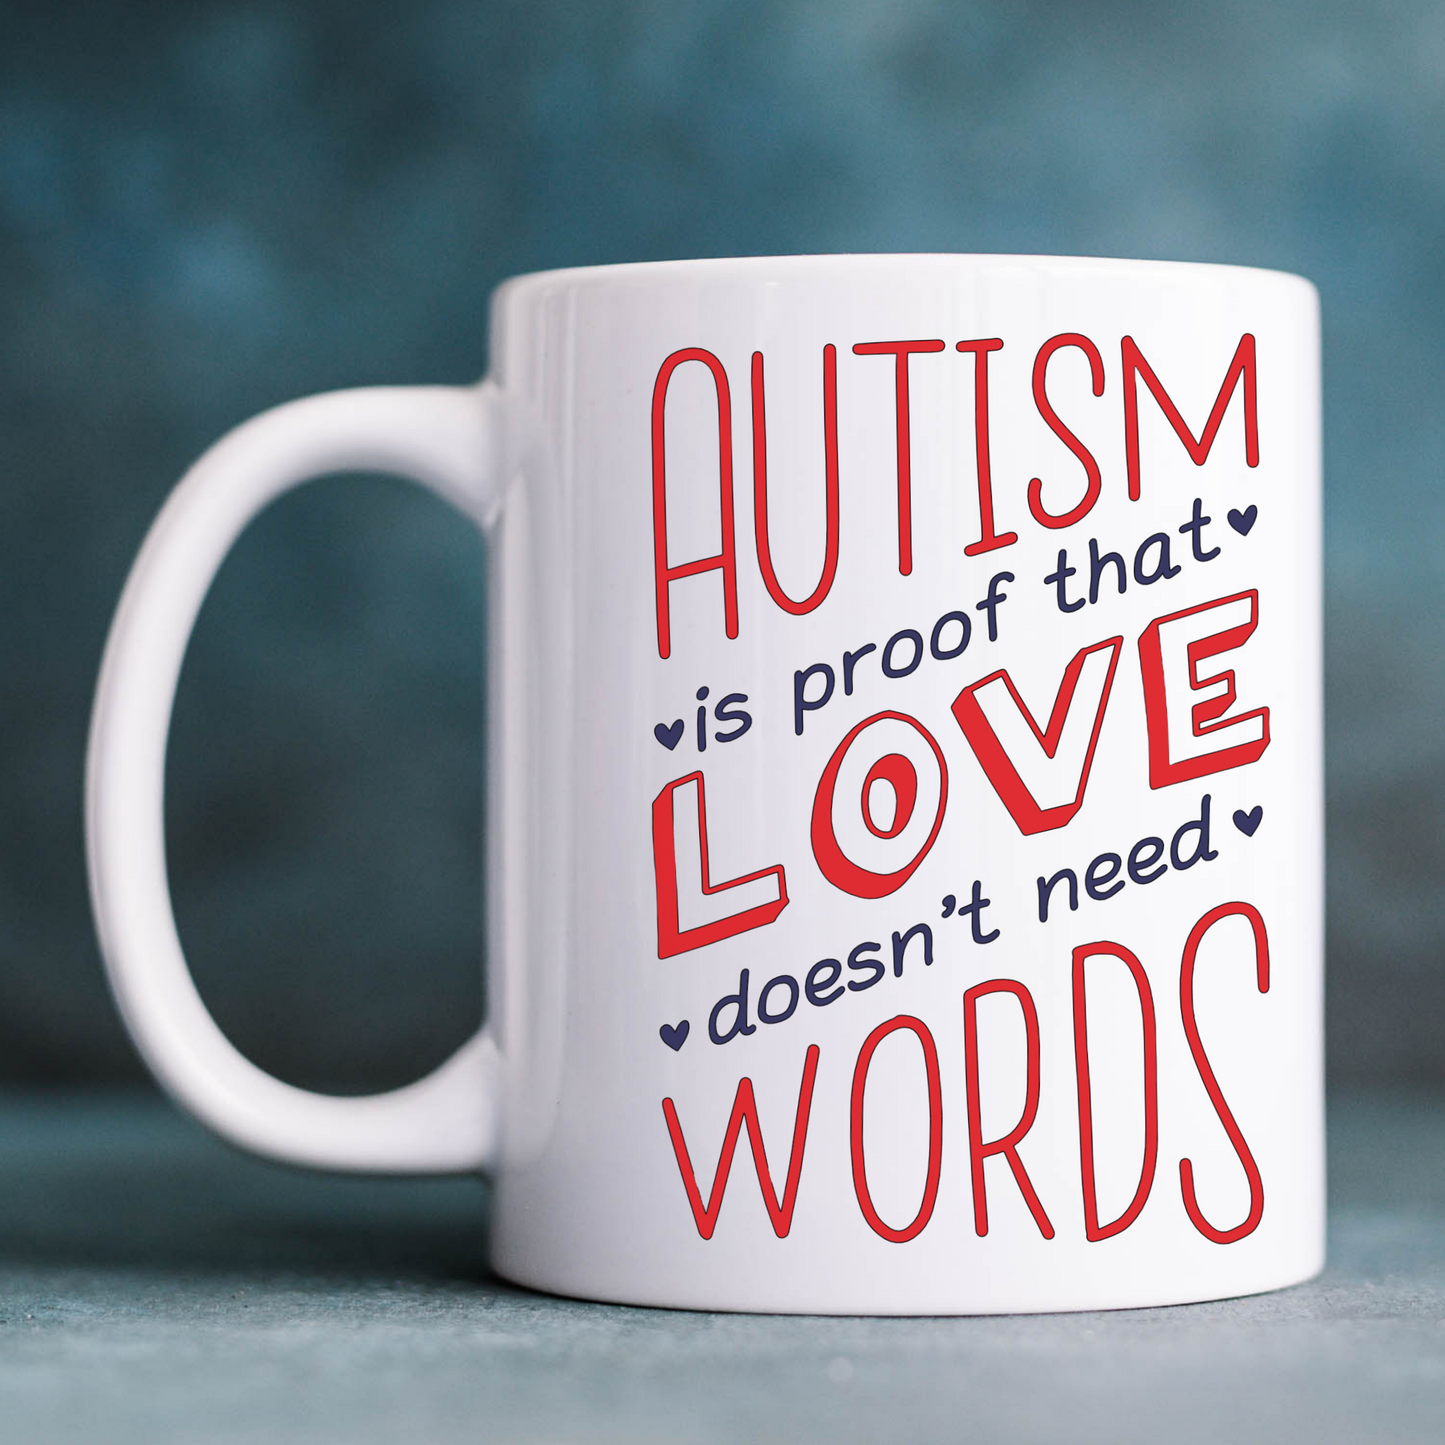 AUTISM IS PROOF THAT LOVE DOESN’T NEED WORDS